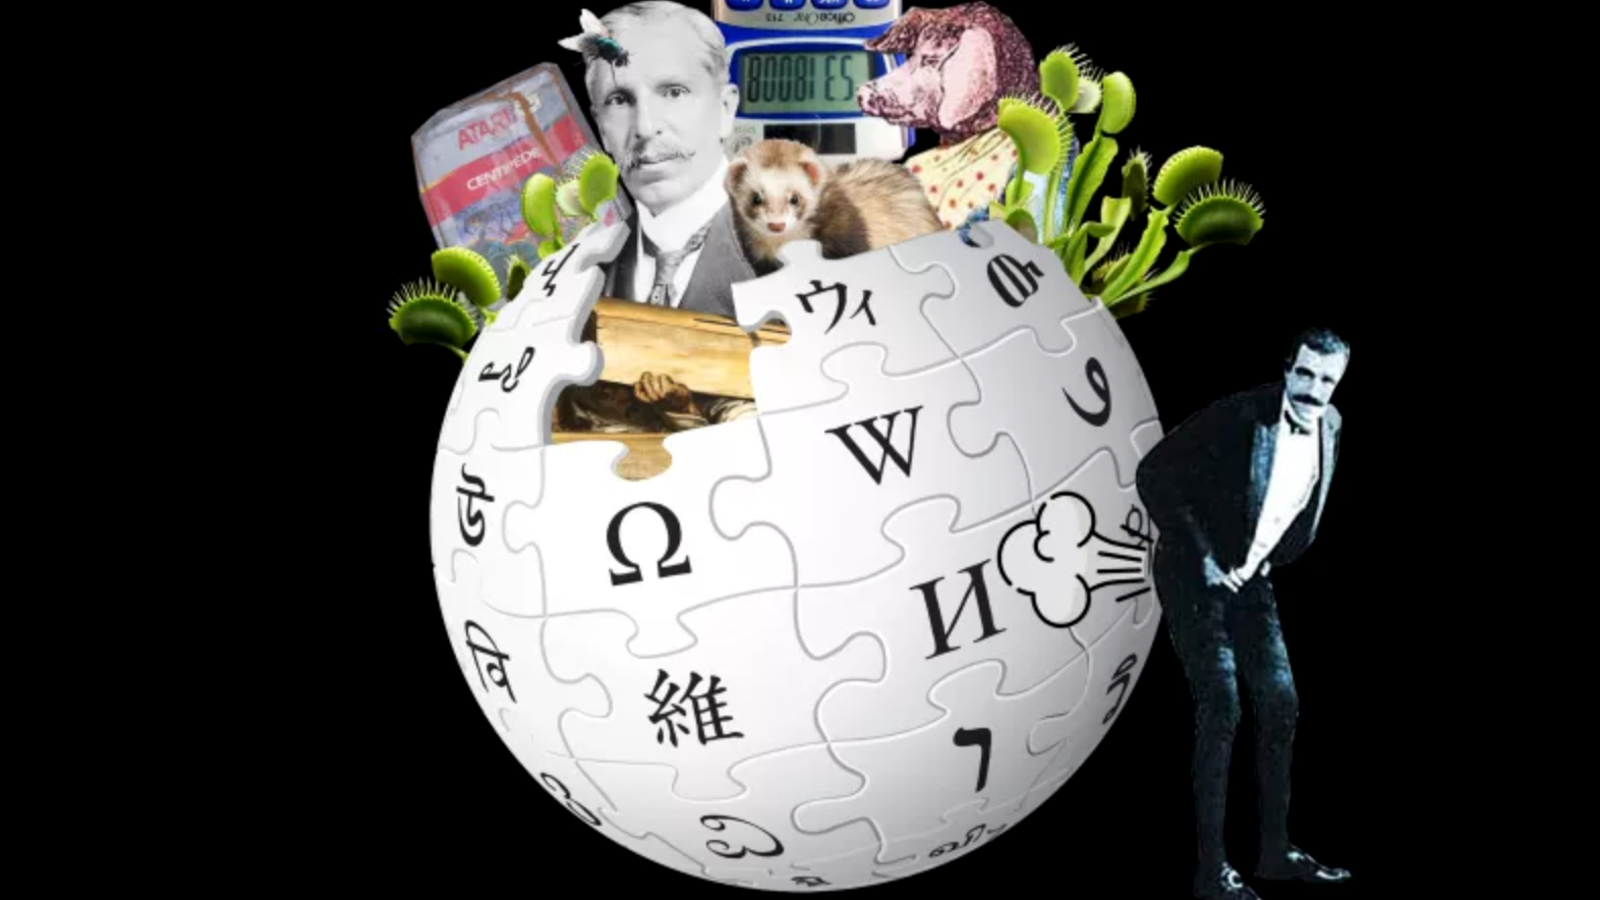 The Best Unusual Articles on Wikipedia